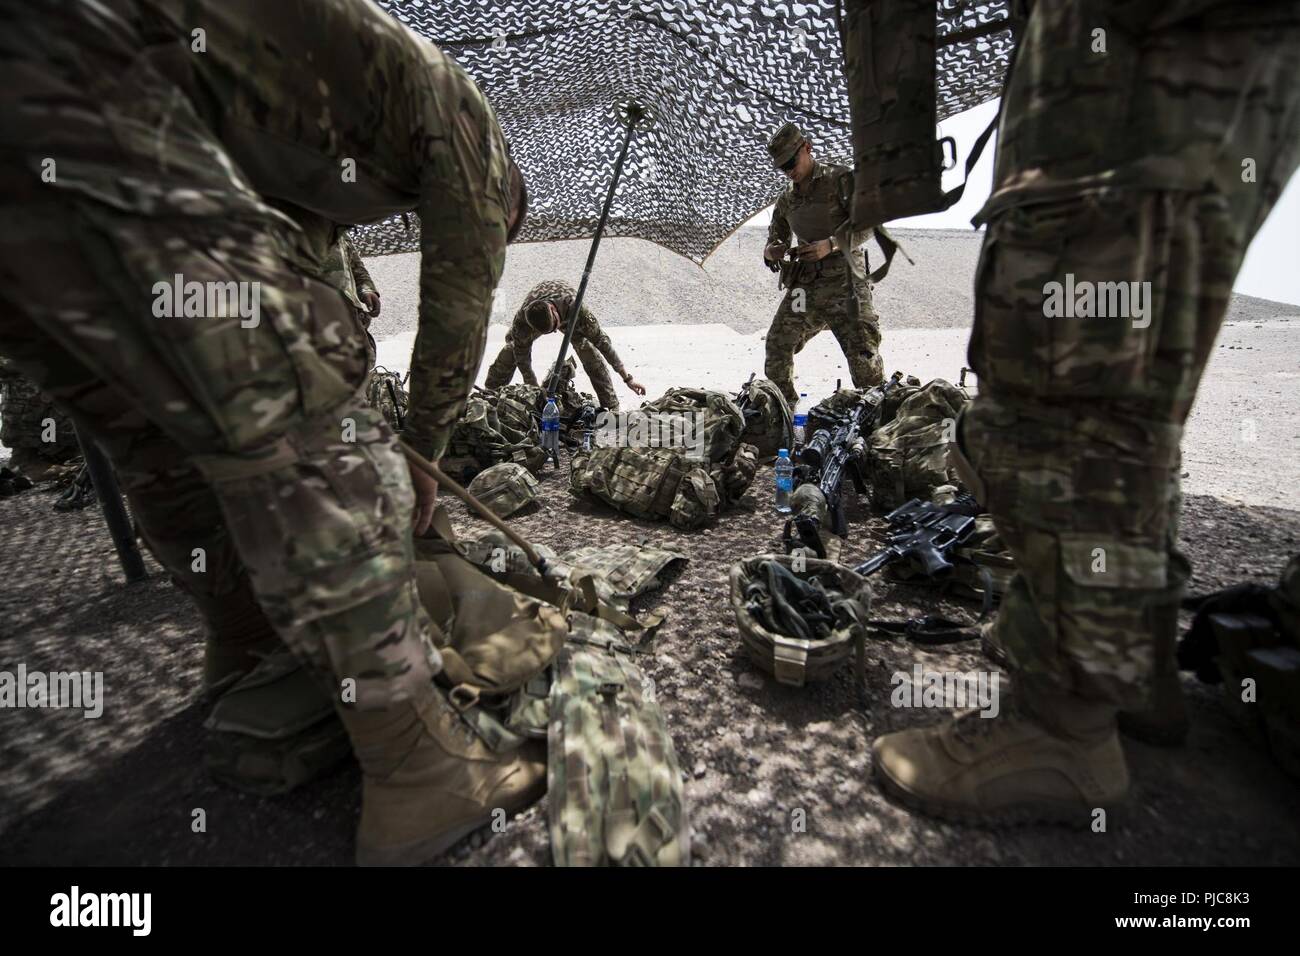 U.S. Army Soldiers, assigned to the 10th Mountain Division and East Africa Response Force, prepare their gear for squad live fire training in Djibouti, July 17, 2018. The EARF quickly and rapidly provides tailorable packages of forces to protect American interests on the African continent should any threats arise. Stock Photo